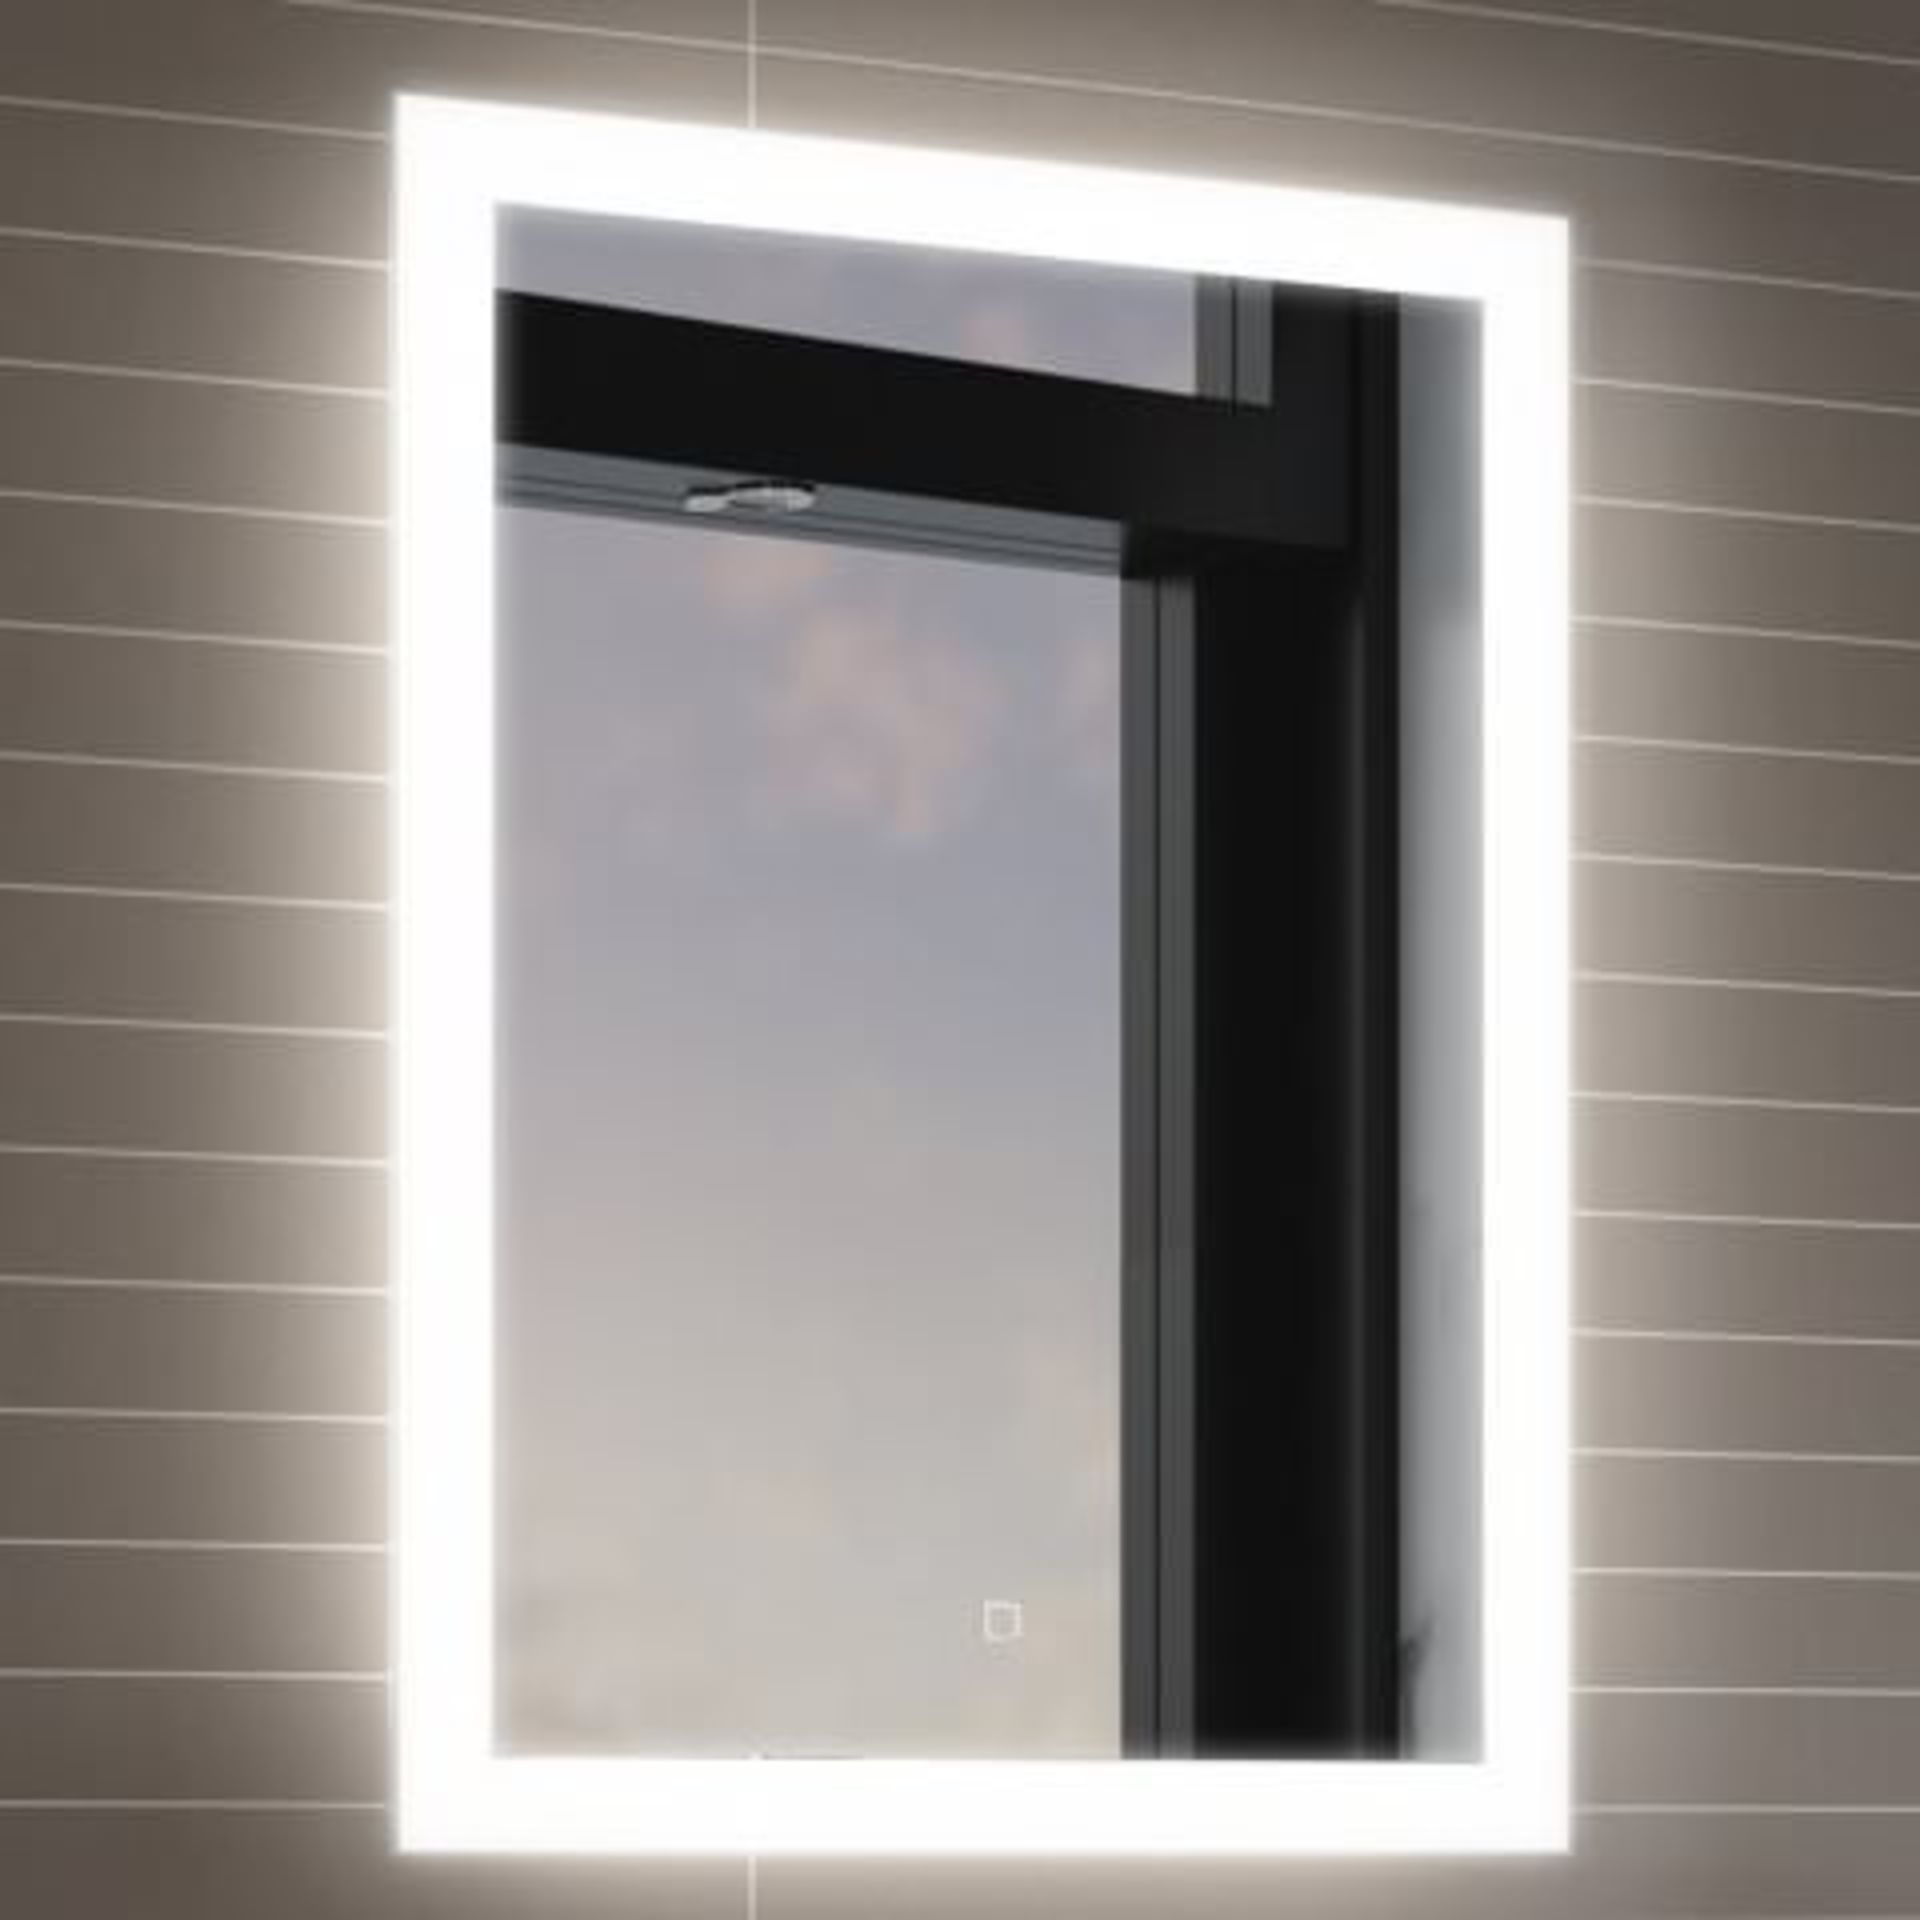 (H24) 700x500mm Orion Illuminated LED Mirror - Switch Control RRP £349.99 Light up your bathroom - Image 4 of 4